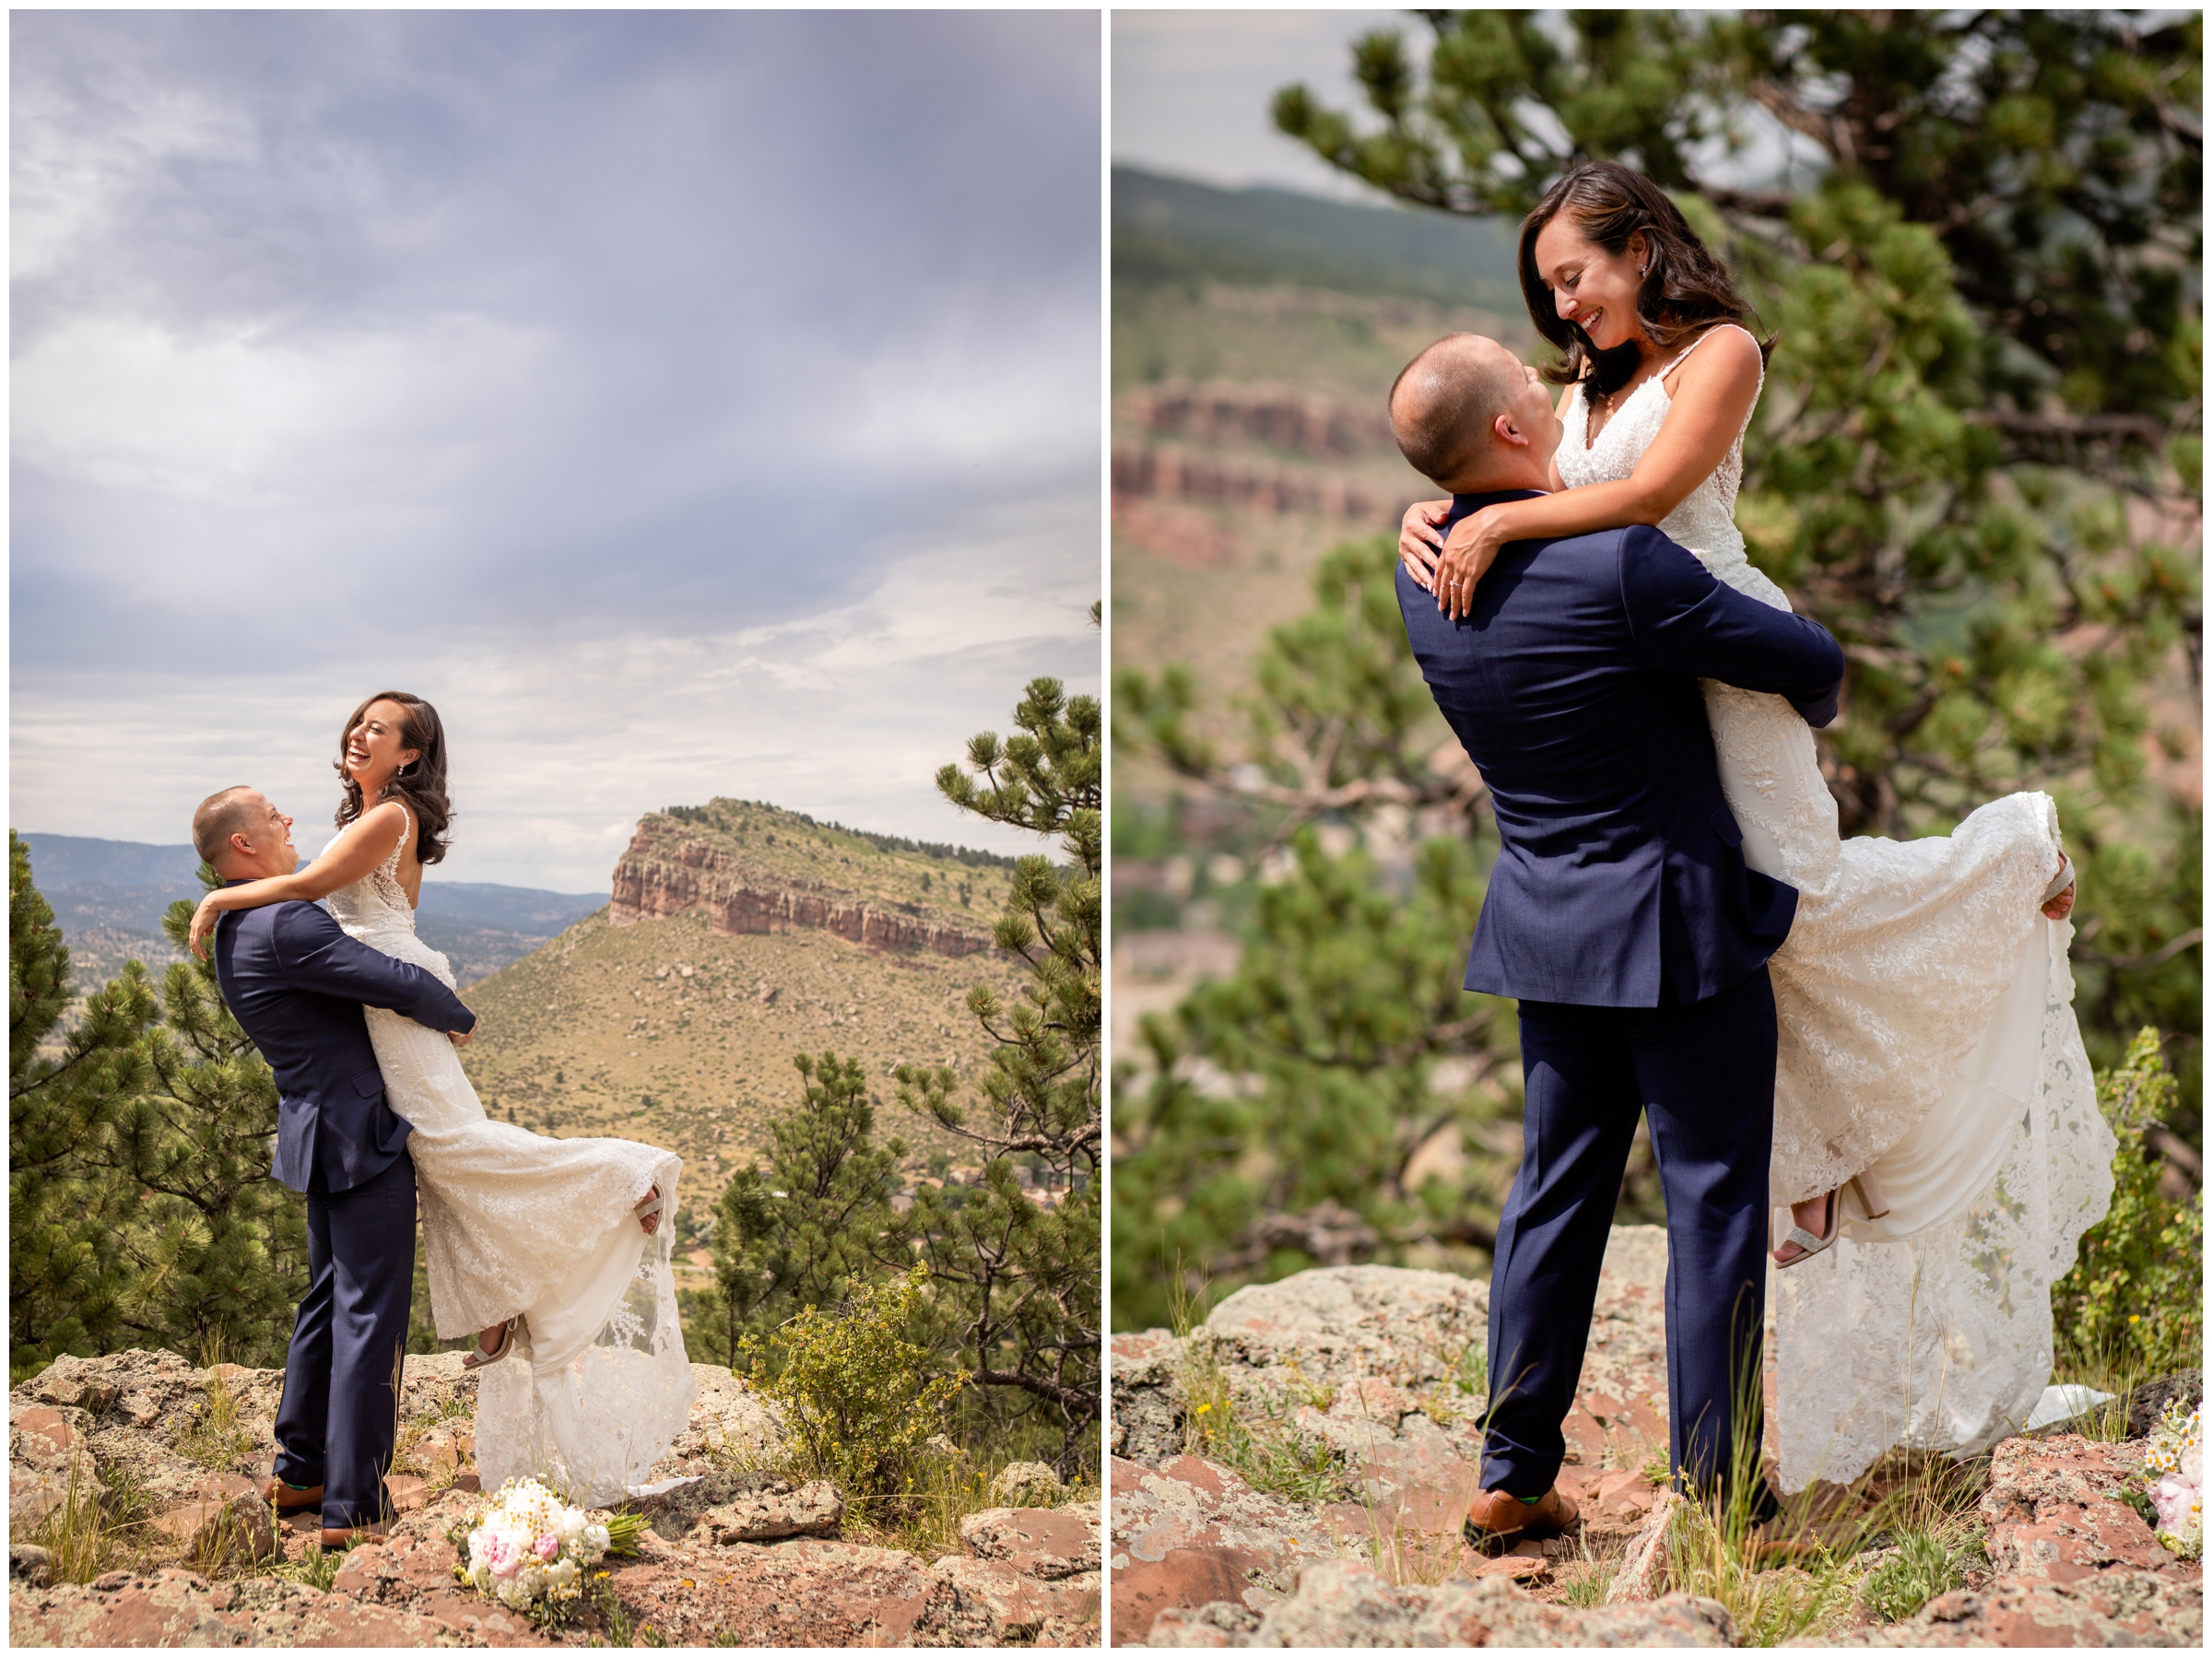 Lionscrest wedding photography during summer by Lyons Colorado photographer Plum Pretty Photography